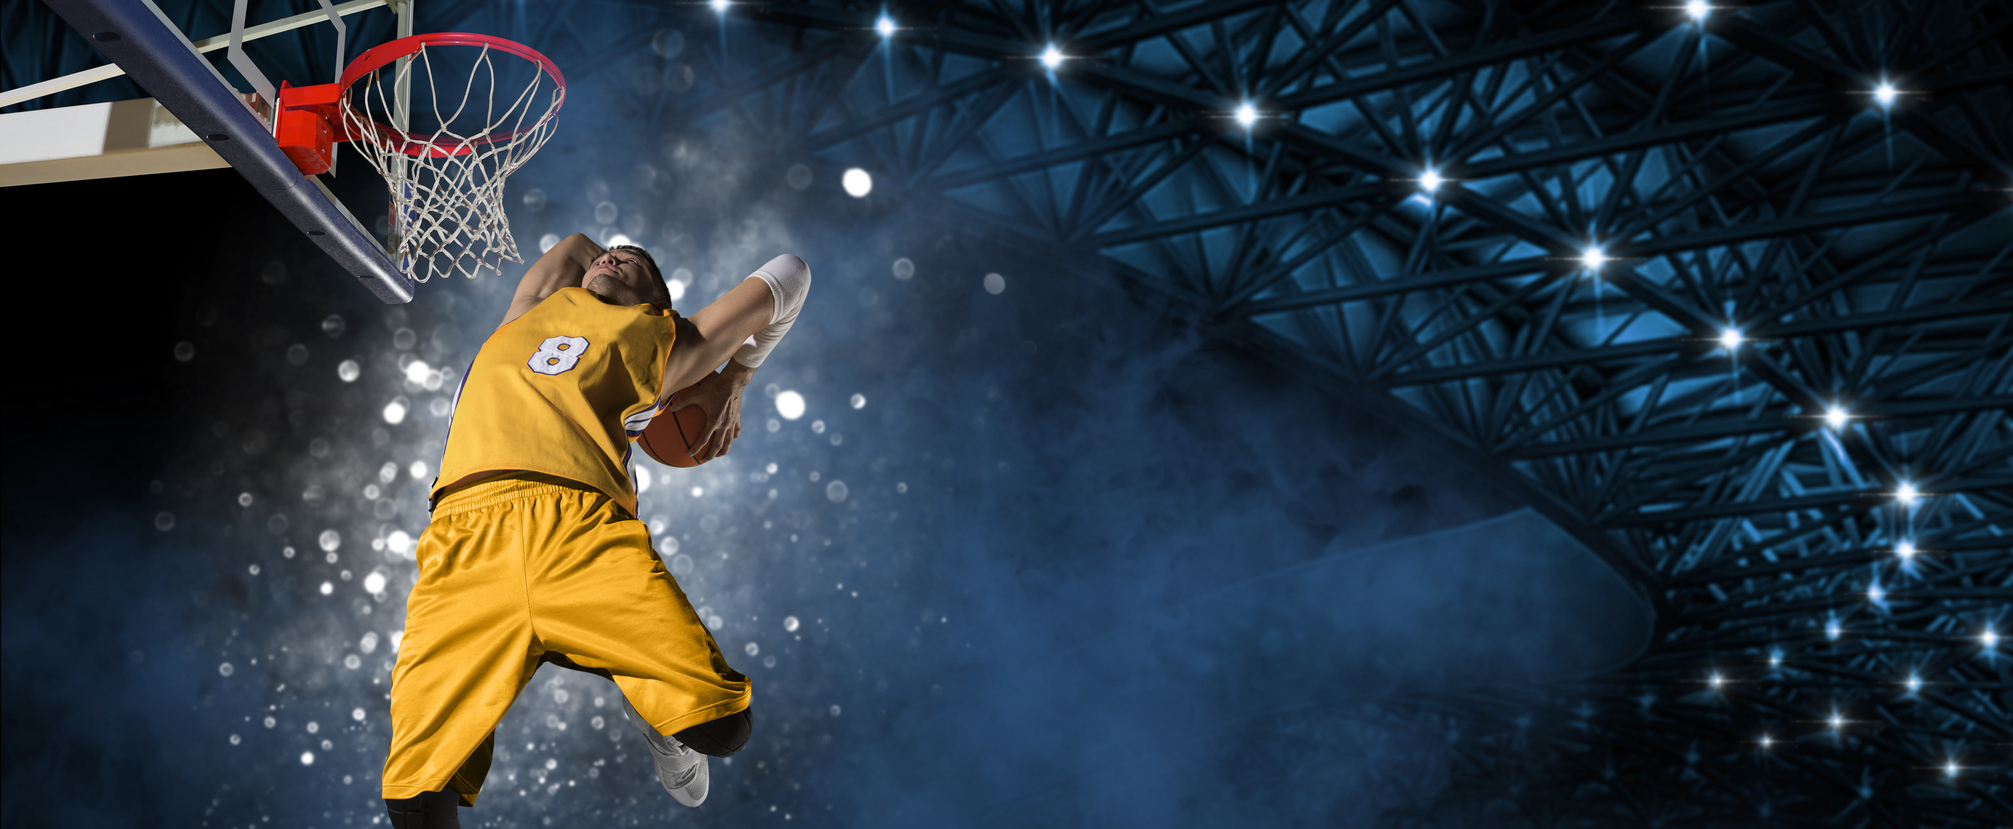 a basketball player wearing a yellow uniform is seen soaring through the air as he dunks the basketball in the basket. NBA Daily Predictions & Expert Picks